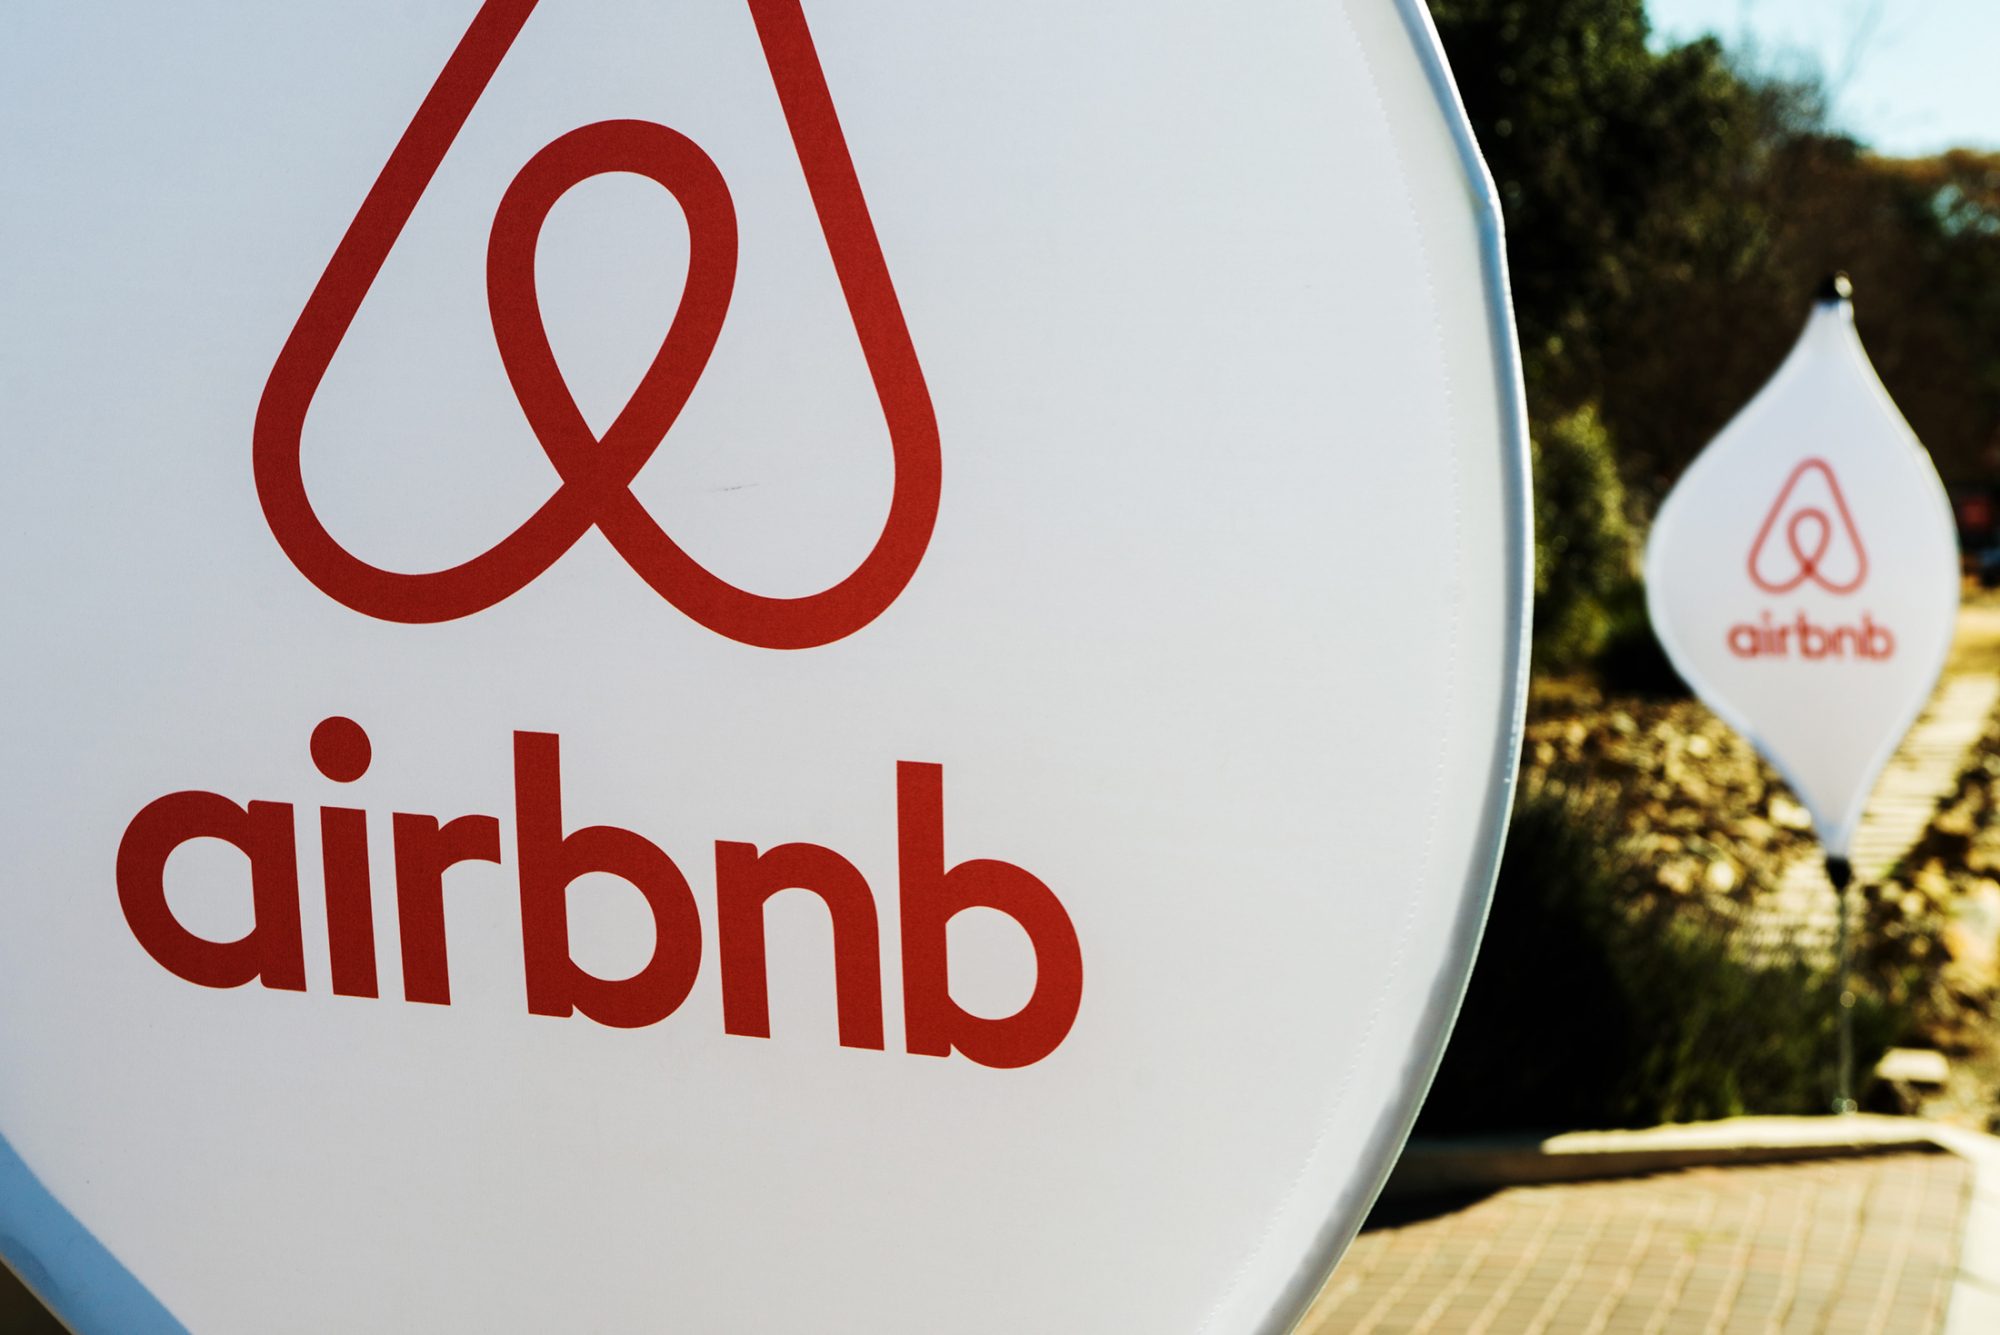 Airbnb to pay out $250m to hosts to help ease COVID-19 cancellation pain